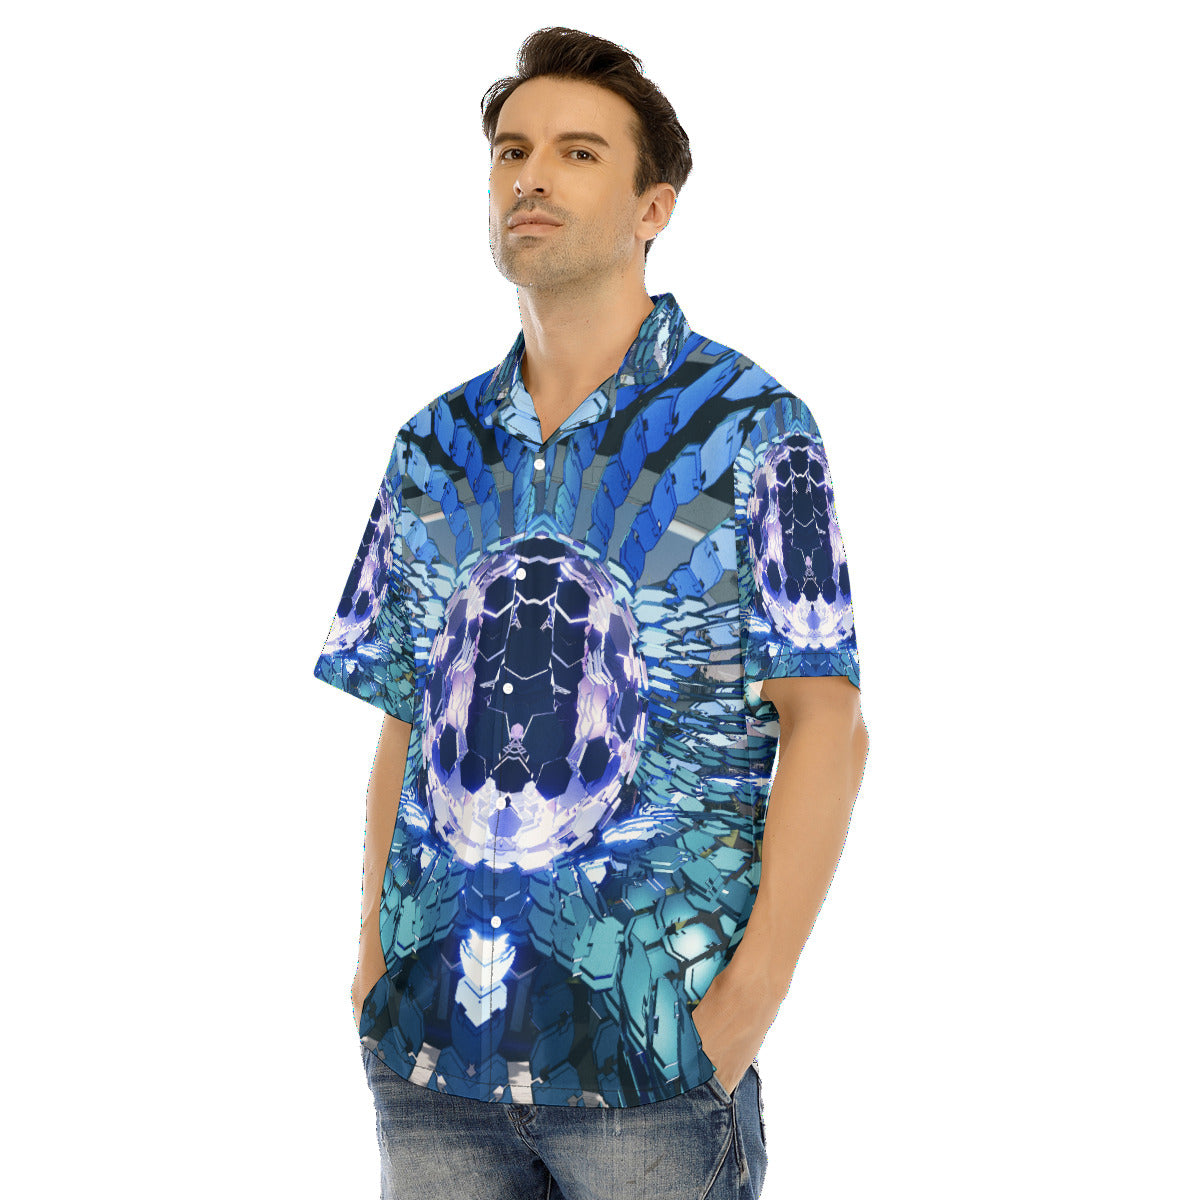 Psychedelic Print Men's Hawaiian Shirt With Button Closure